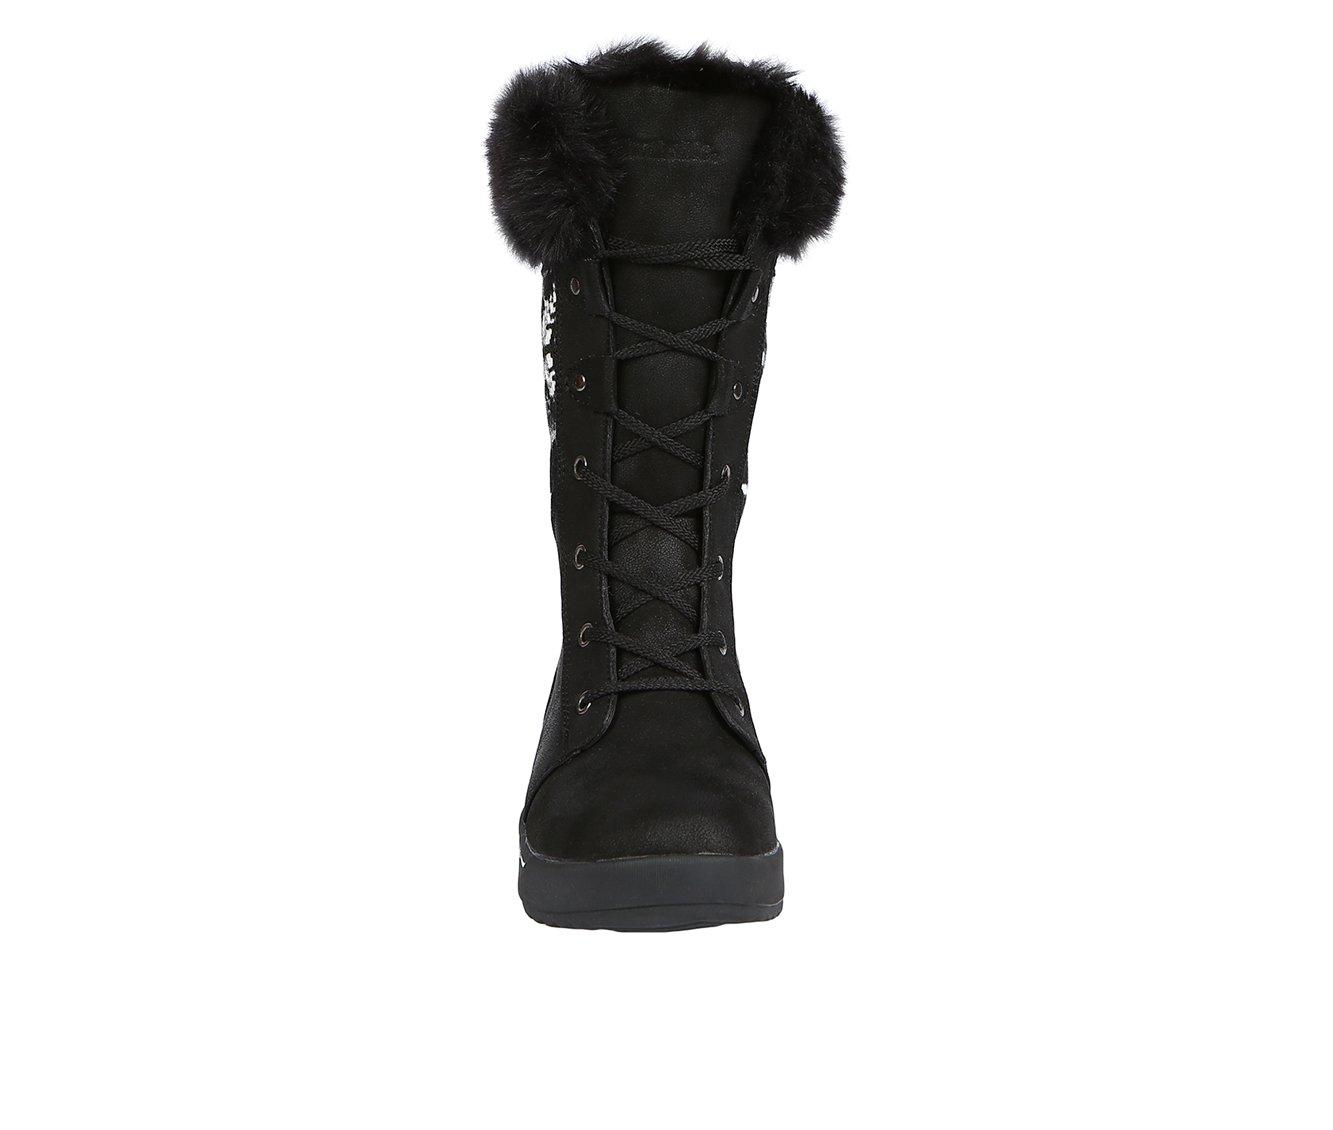 Women's Northside Bishop Special Edition Winter Boots